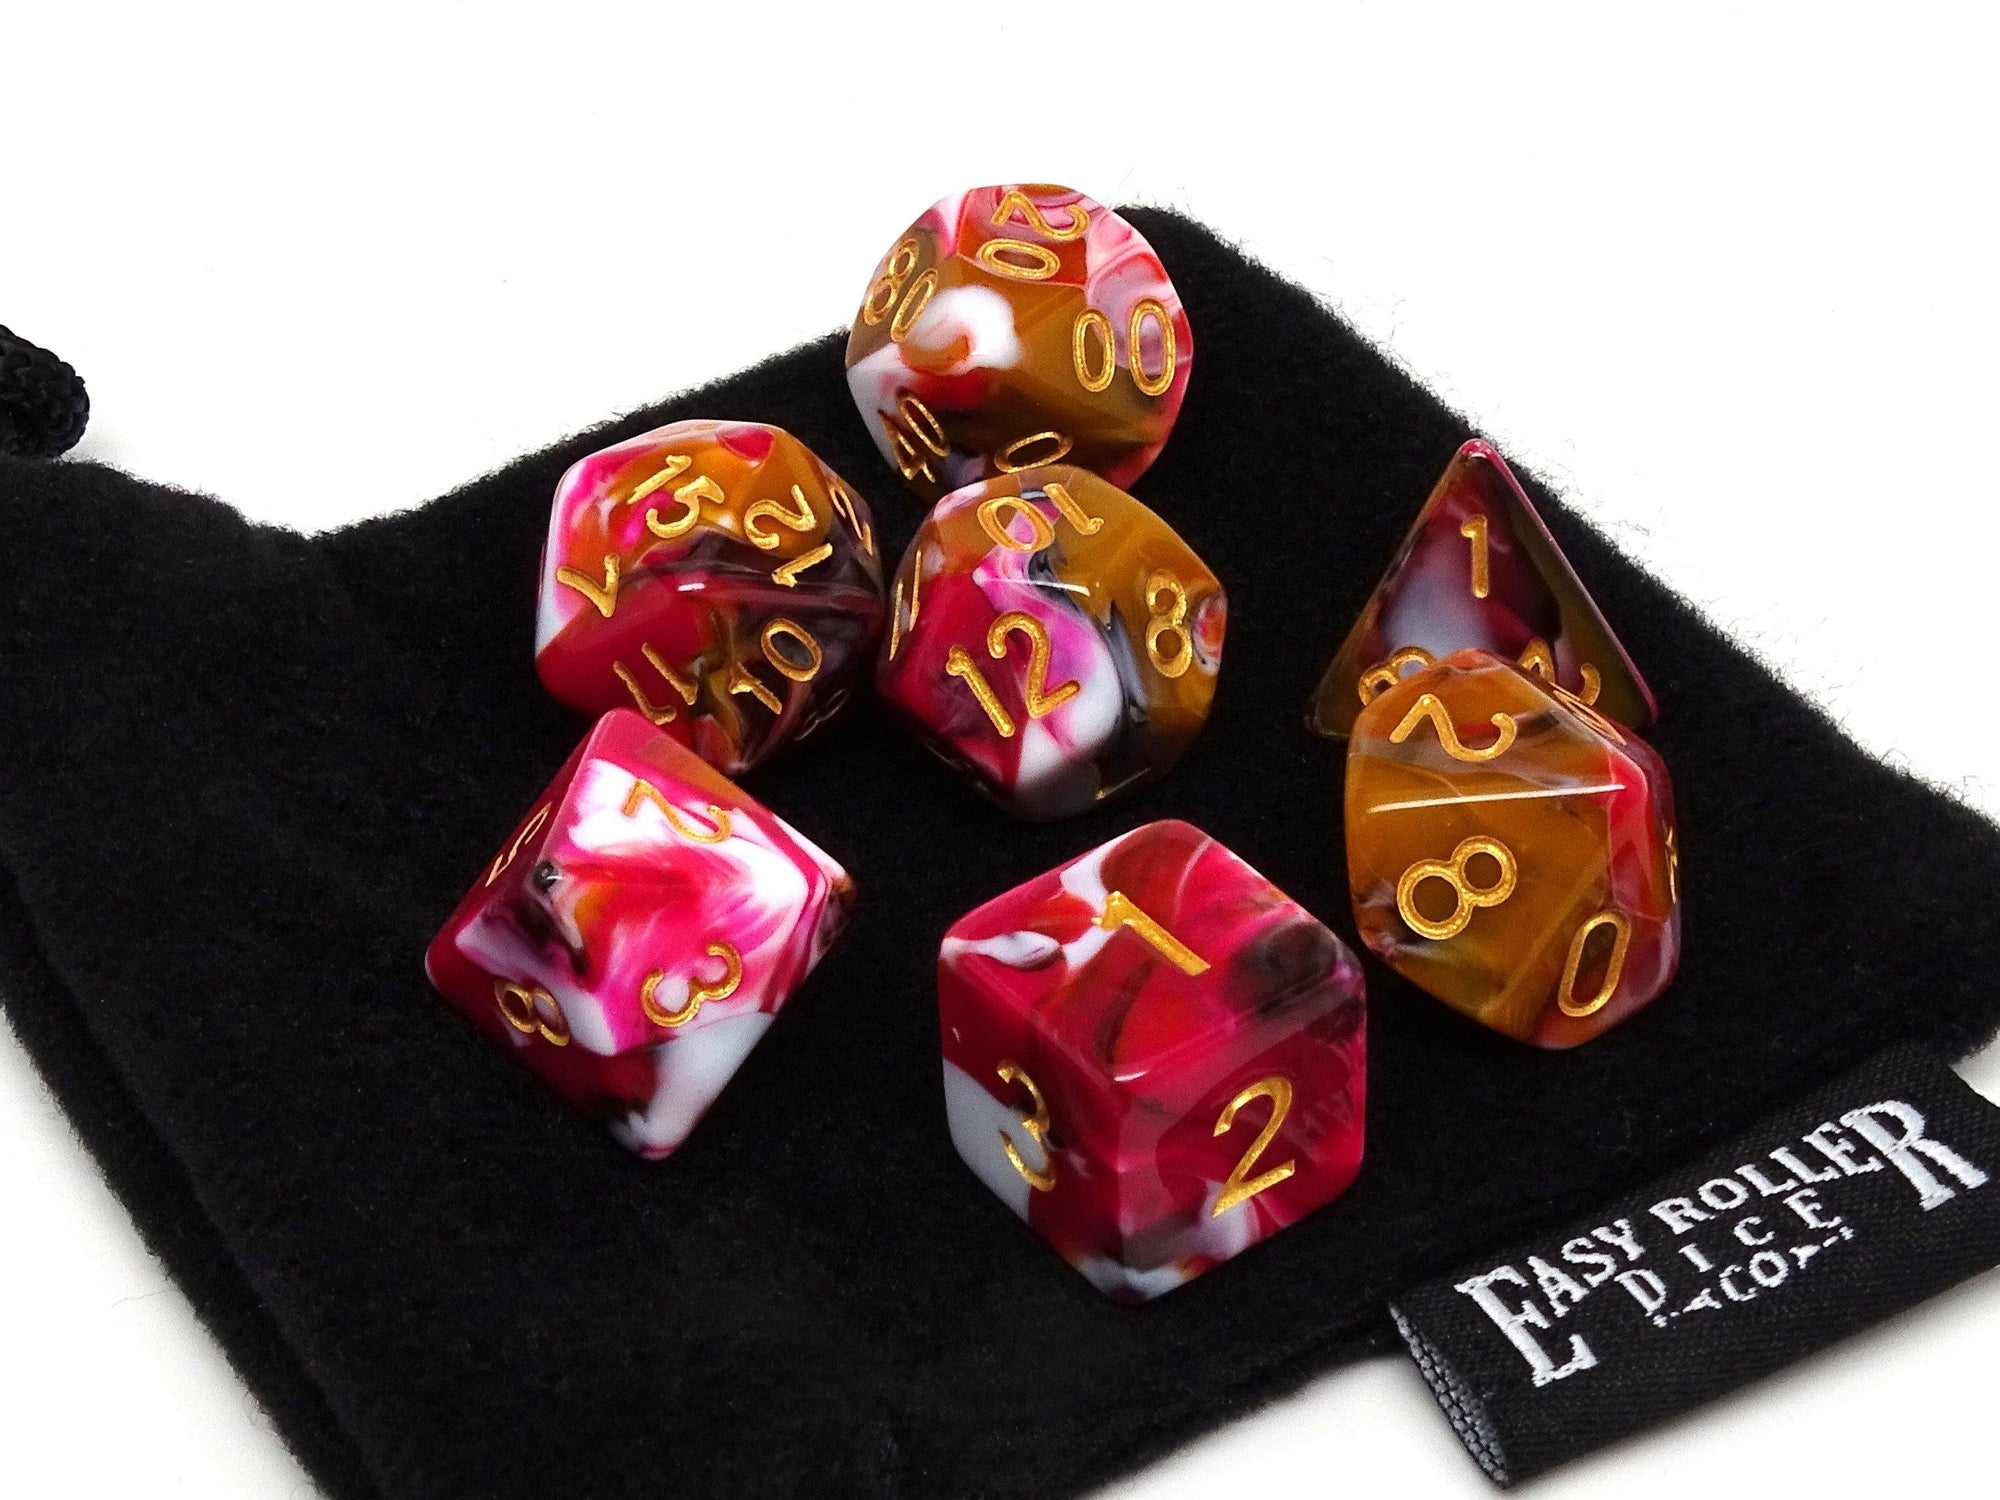 Pink, Brown, and White Marble Dice Collection - 7 Piece Set